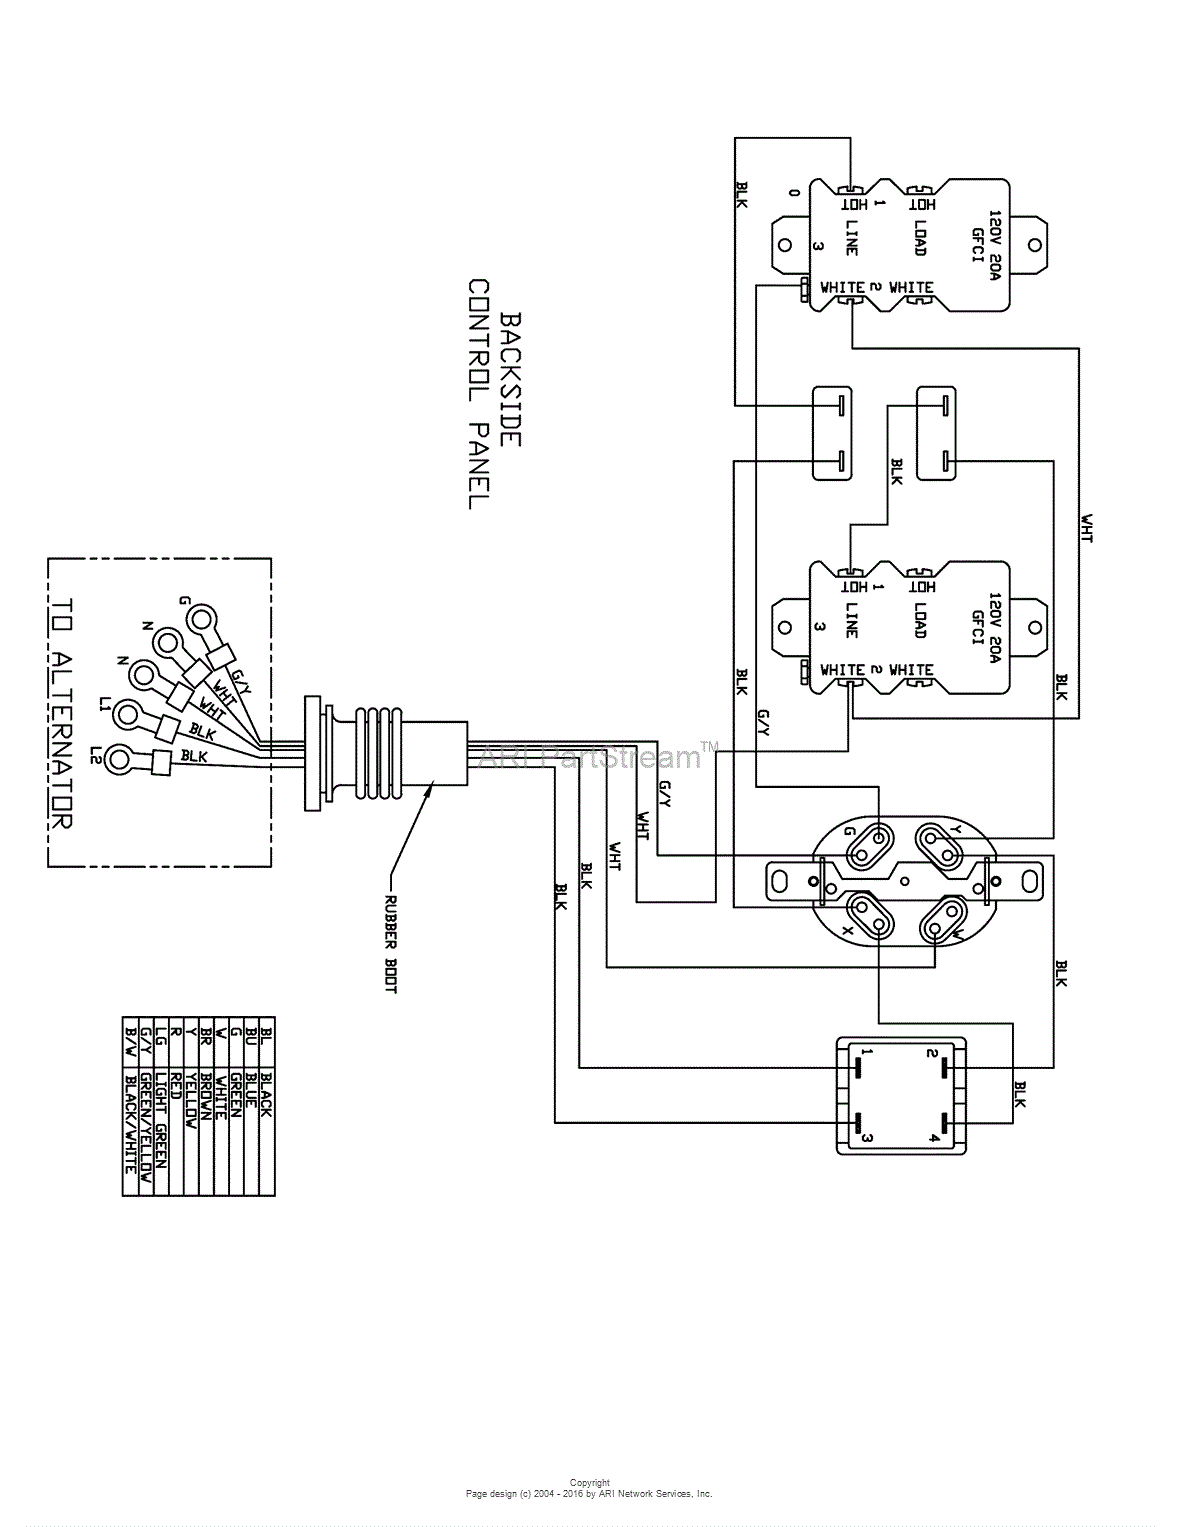 wiring diagram for power mate gt5250